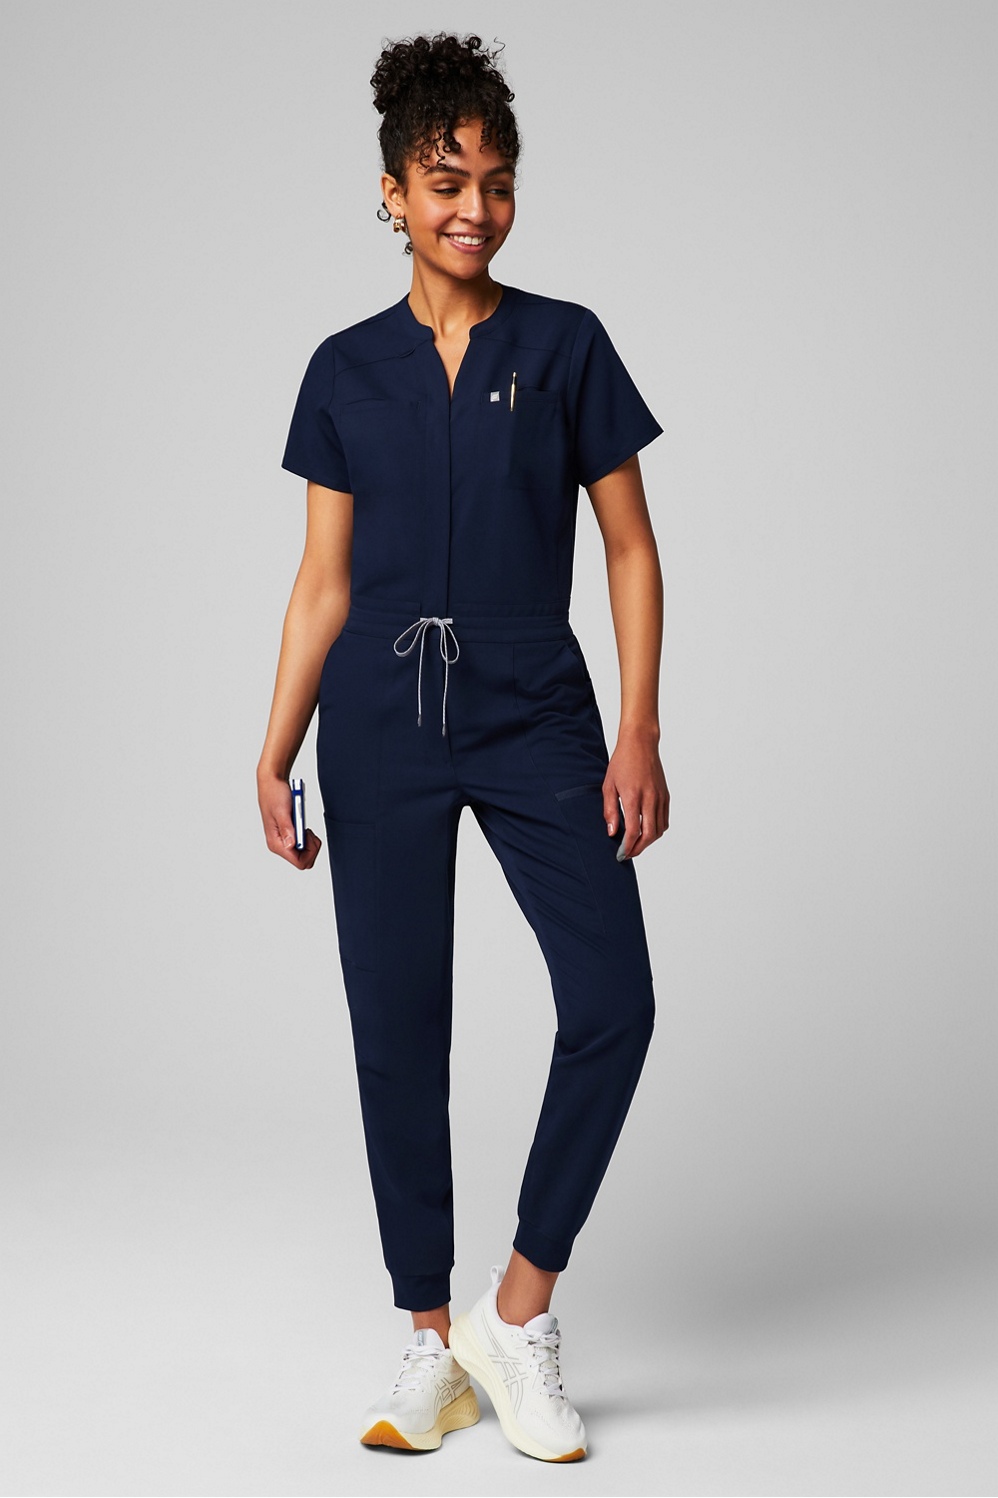 Fabletics Scrubs Canada - The World's Only Activewear Scrubs